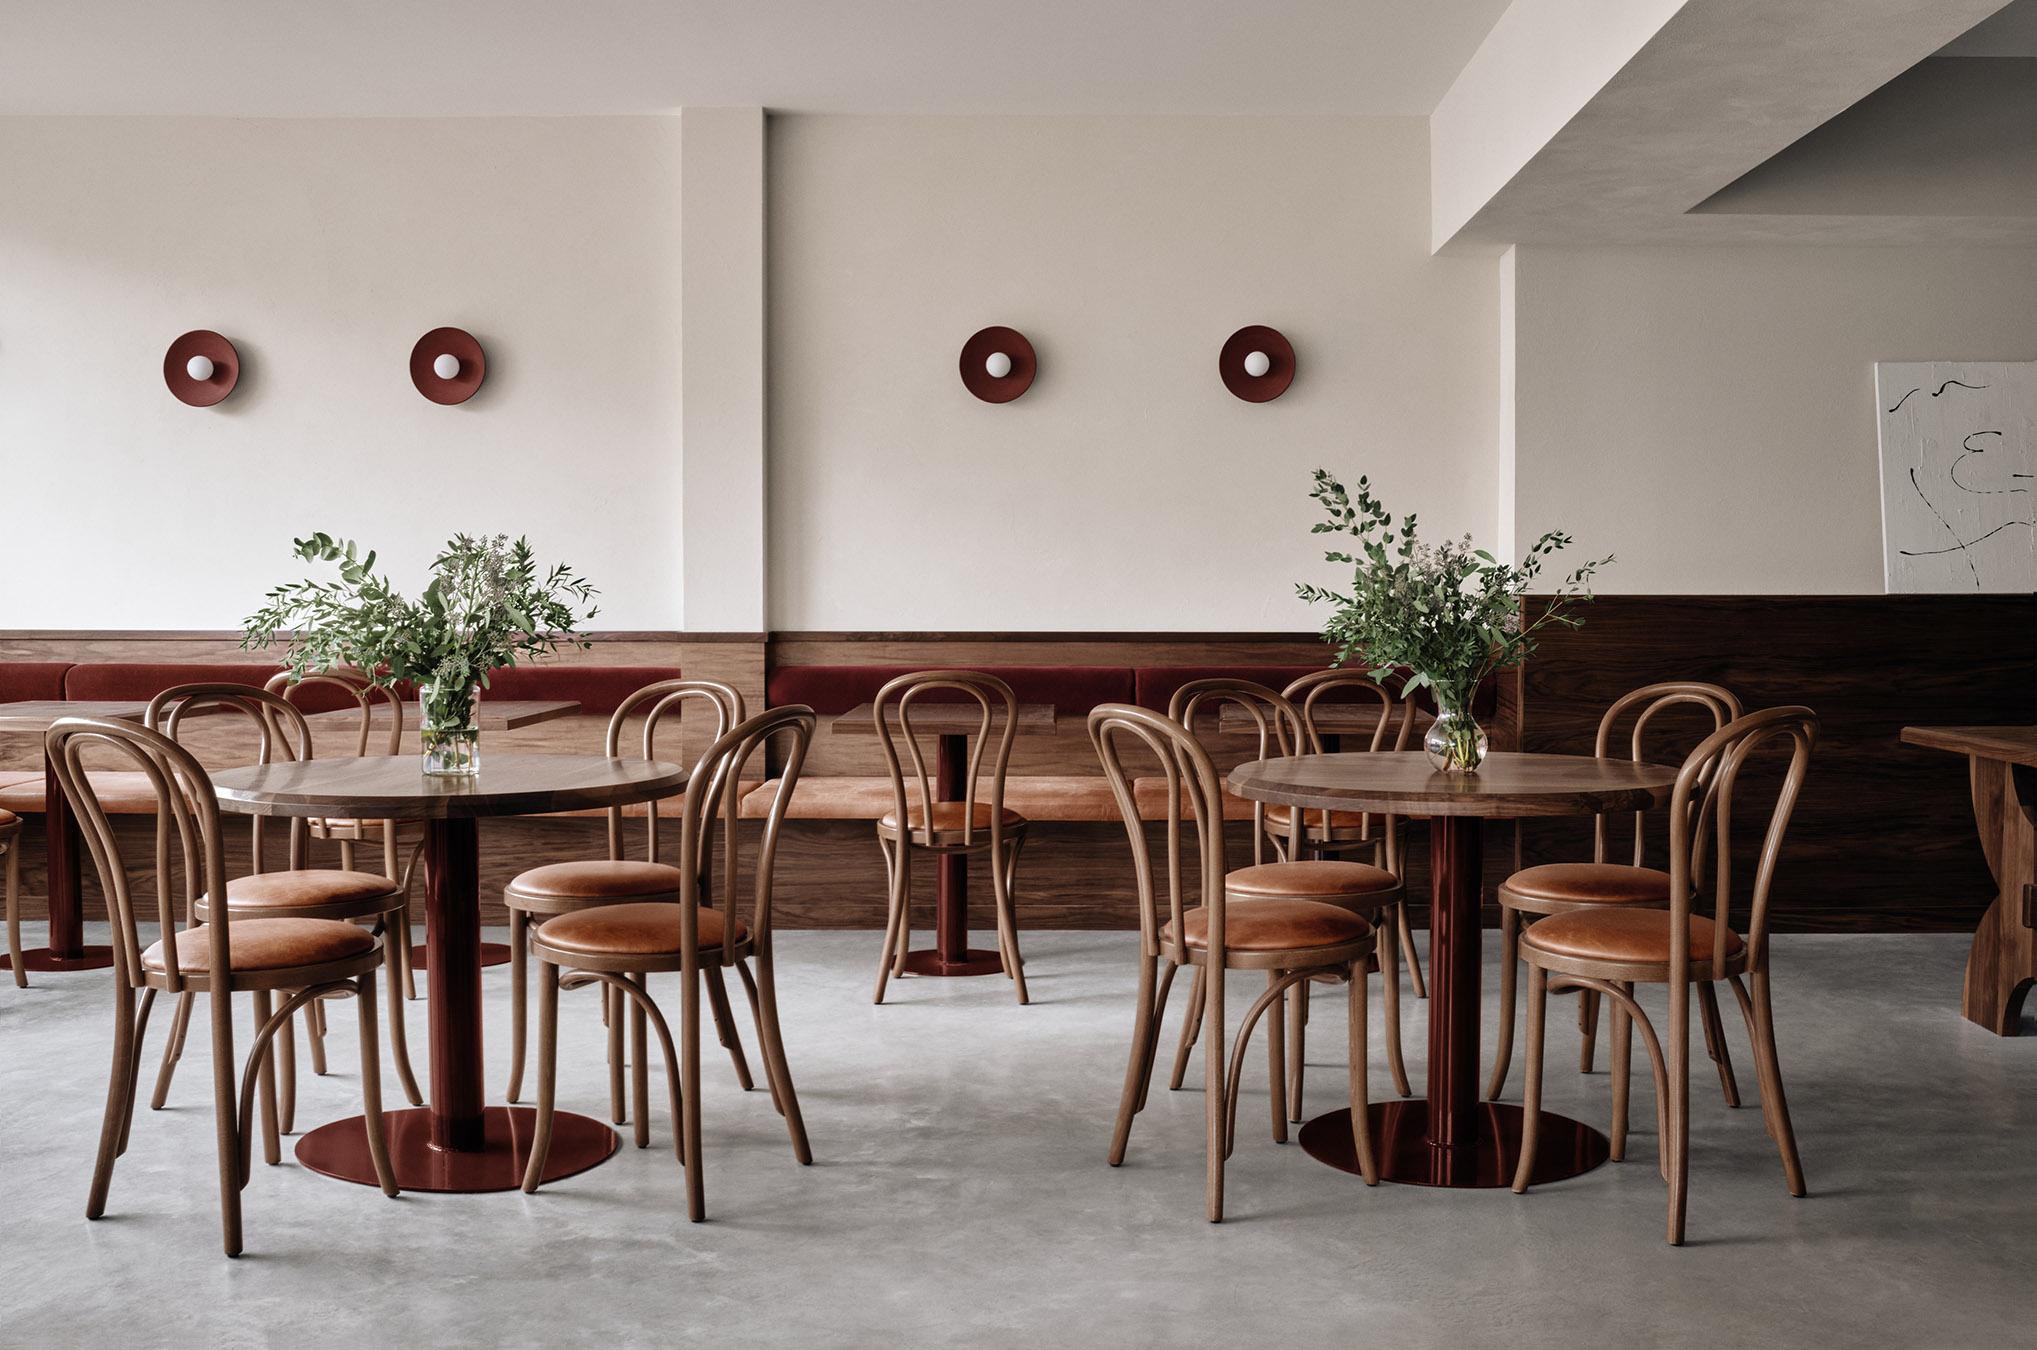 Café Chez Teta. Walnut wood and Lebanese traditions for a space with a minimalist aesthetic